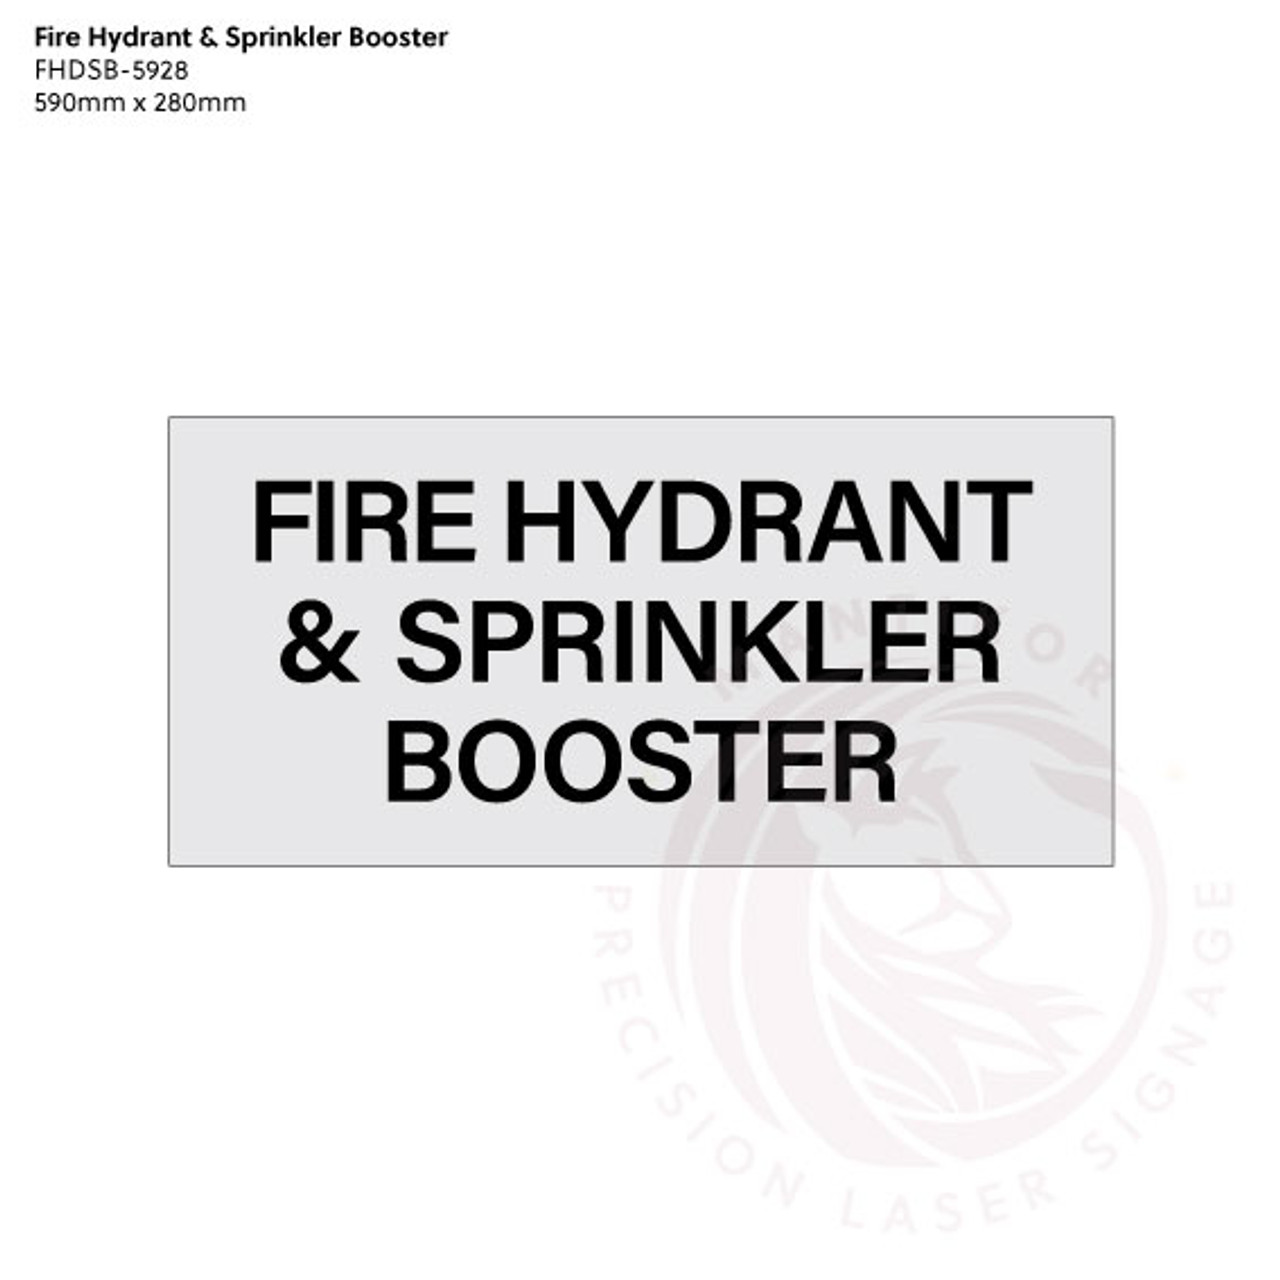 Fire Hydrant and Sprinkler Booster - Standard statutory sign, compliant with the Building Code of Australia requirements.